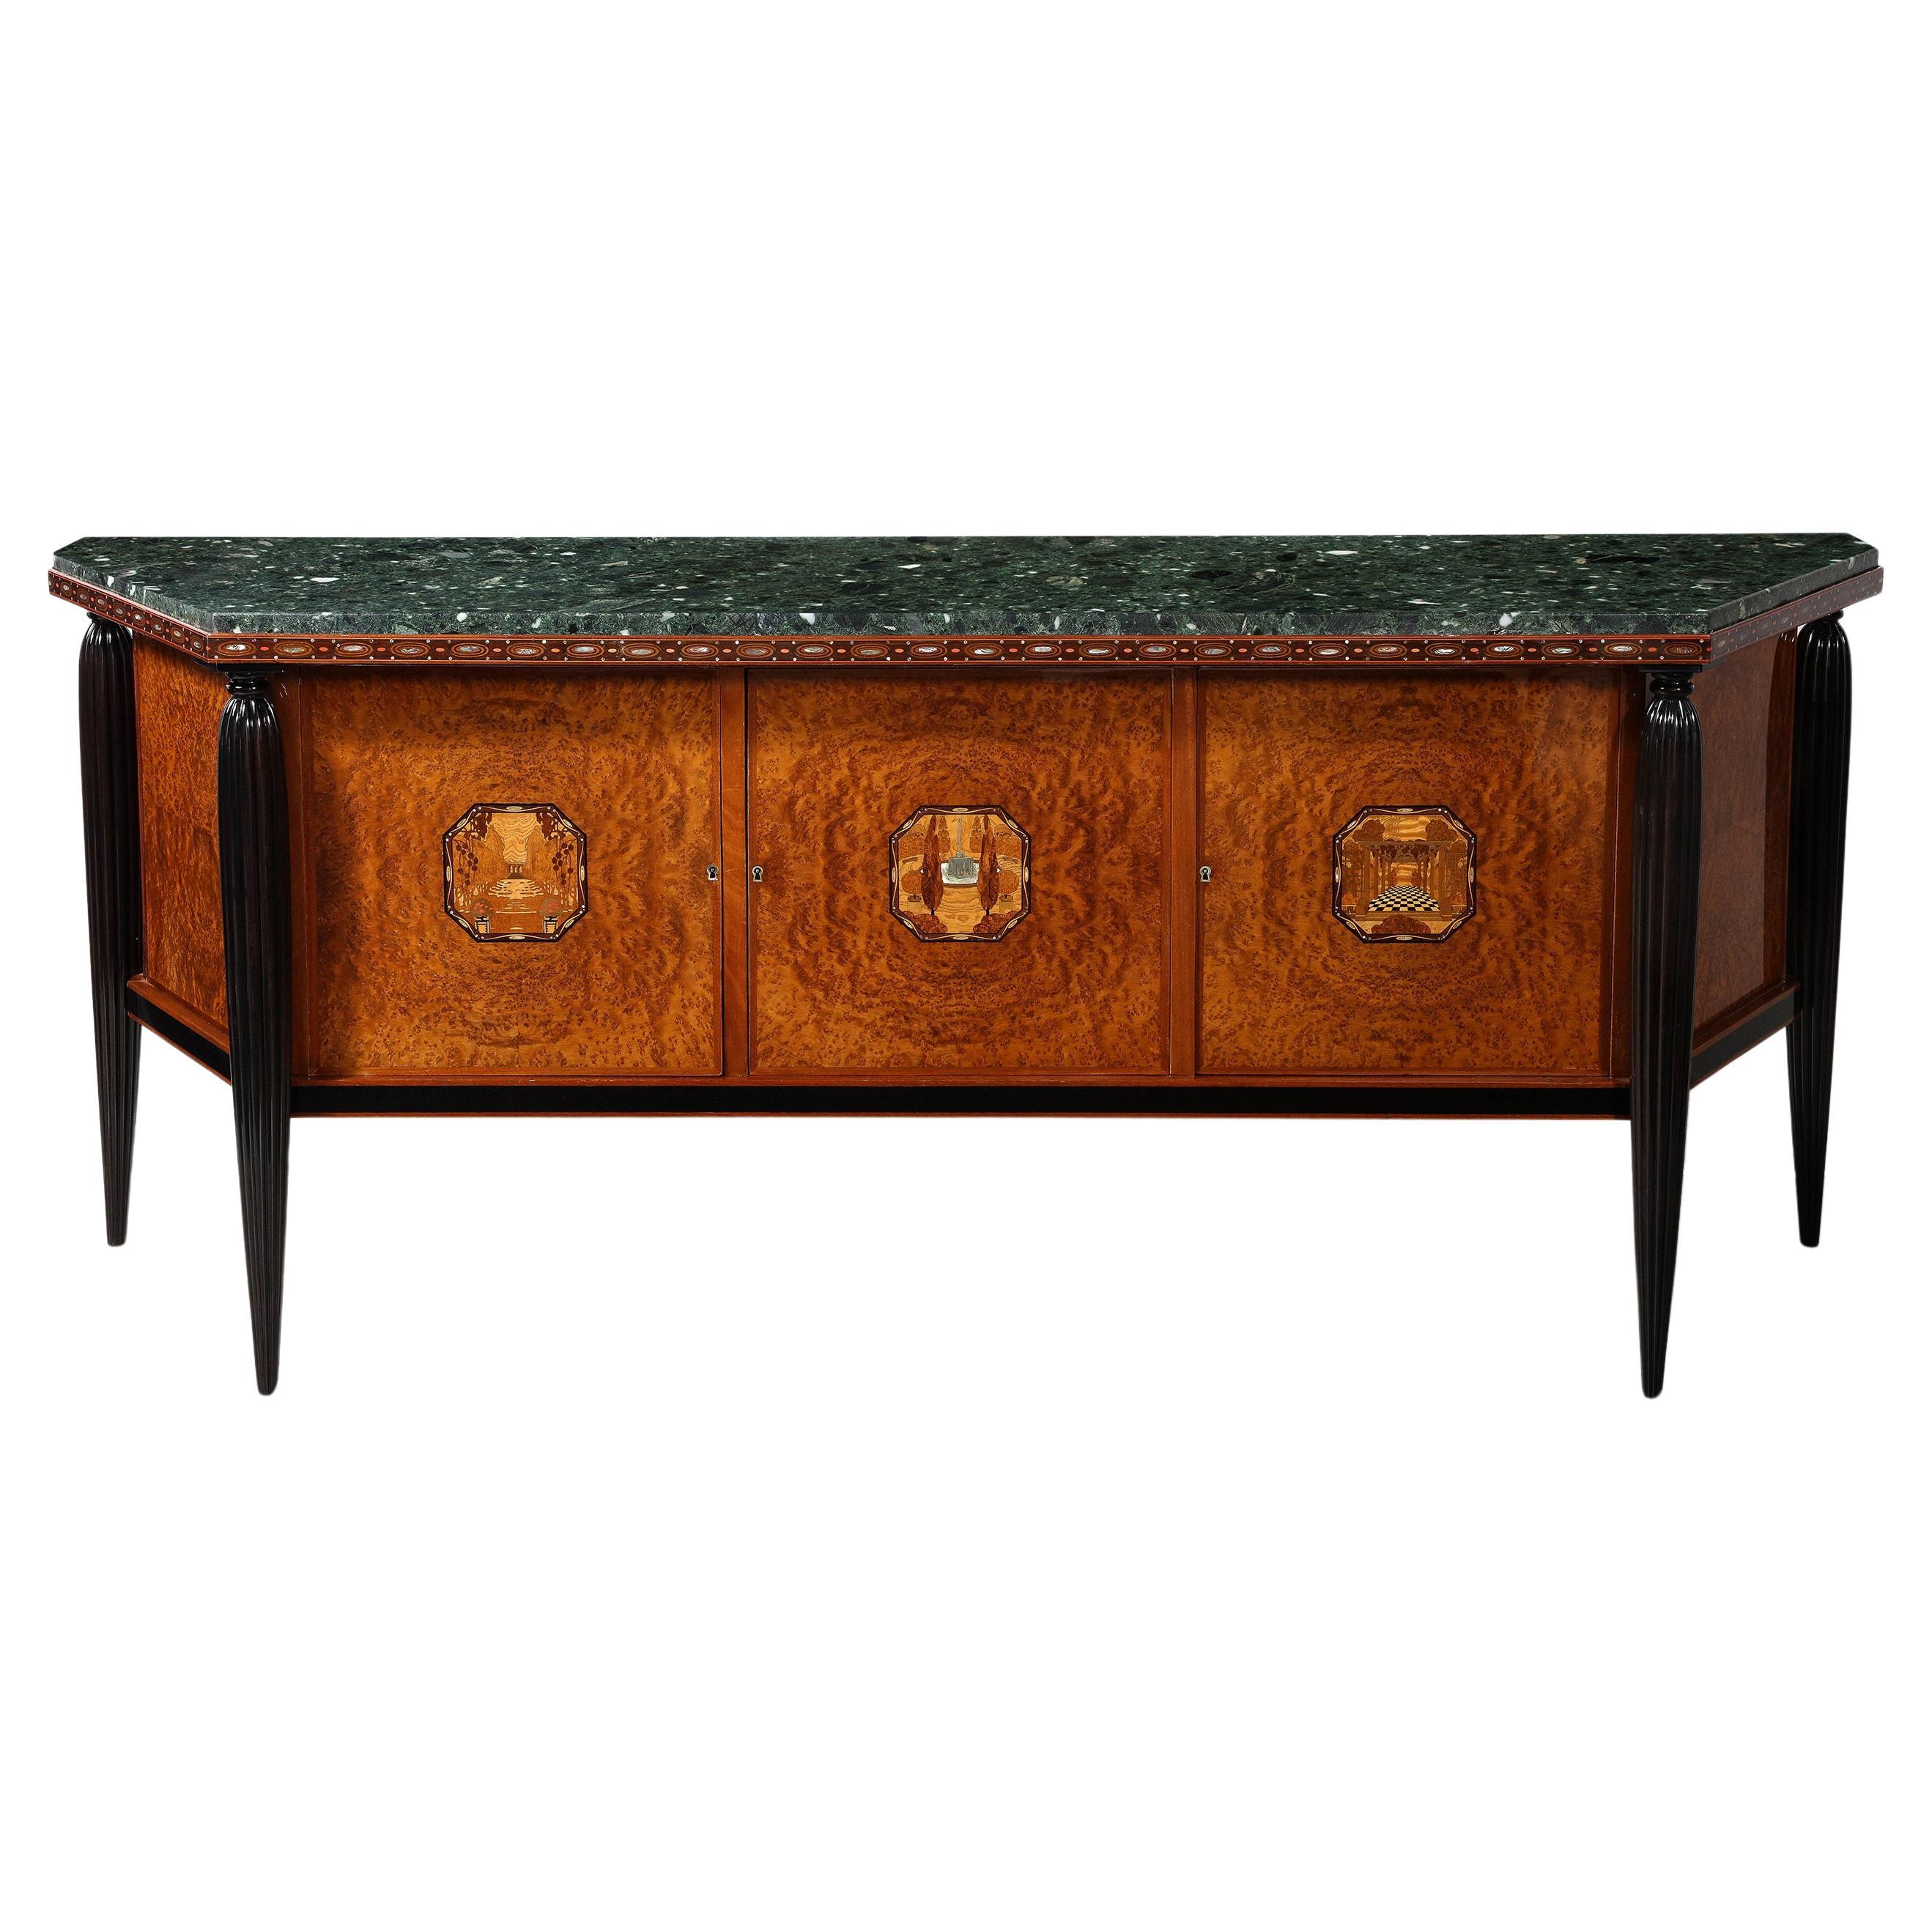 Important and Unique Art Deco Sideboard